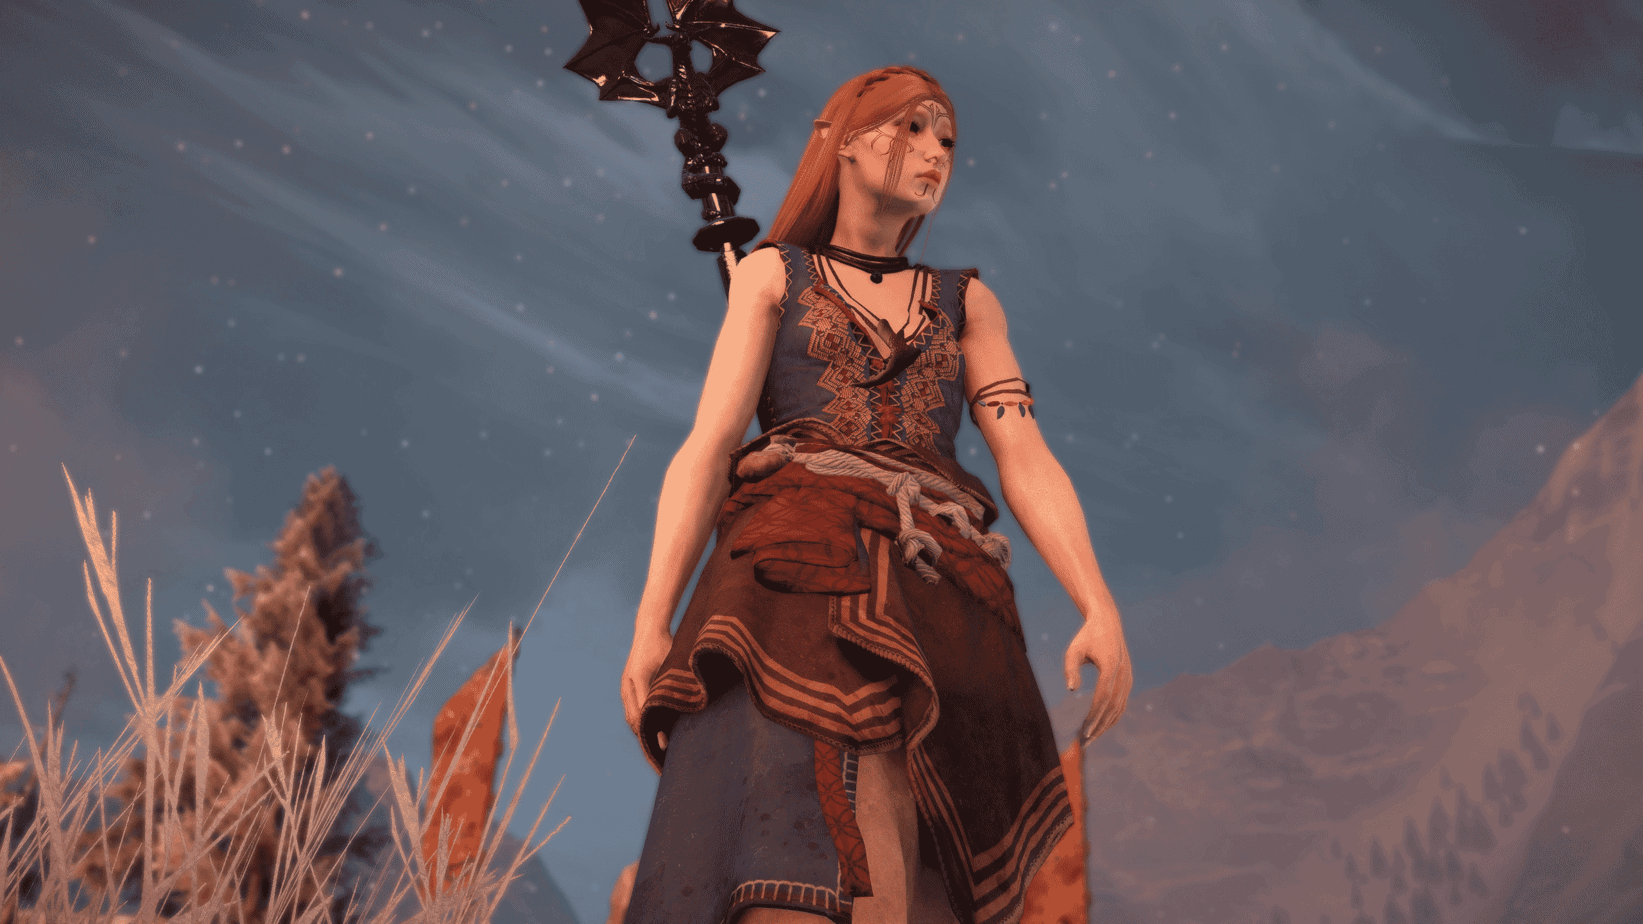 Dragon Age: Inquisition - The Witcher 3 inspired clothing